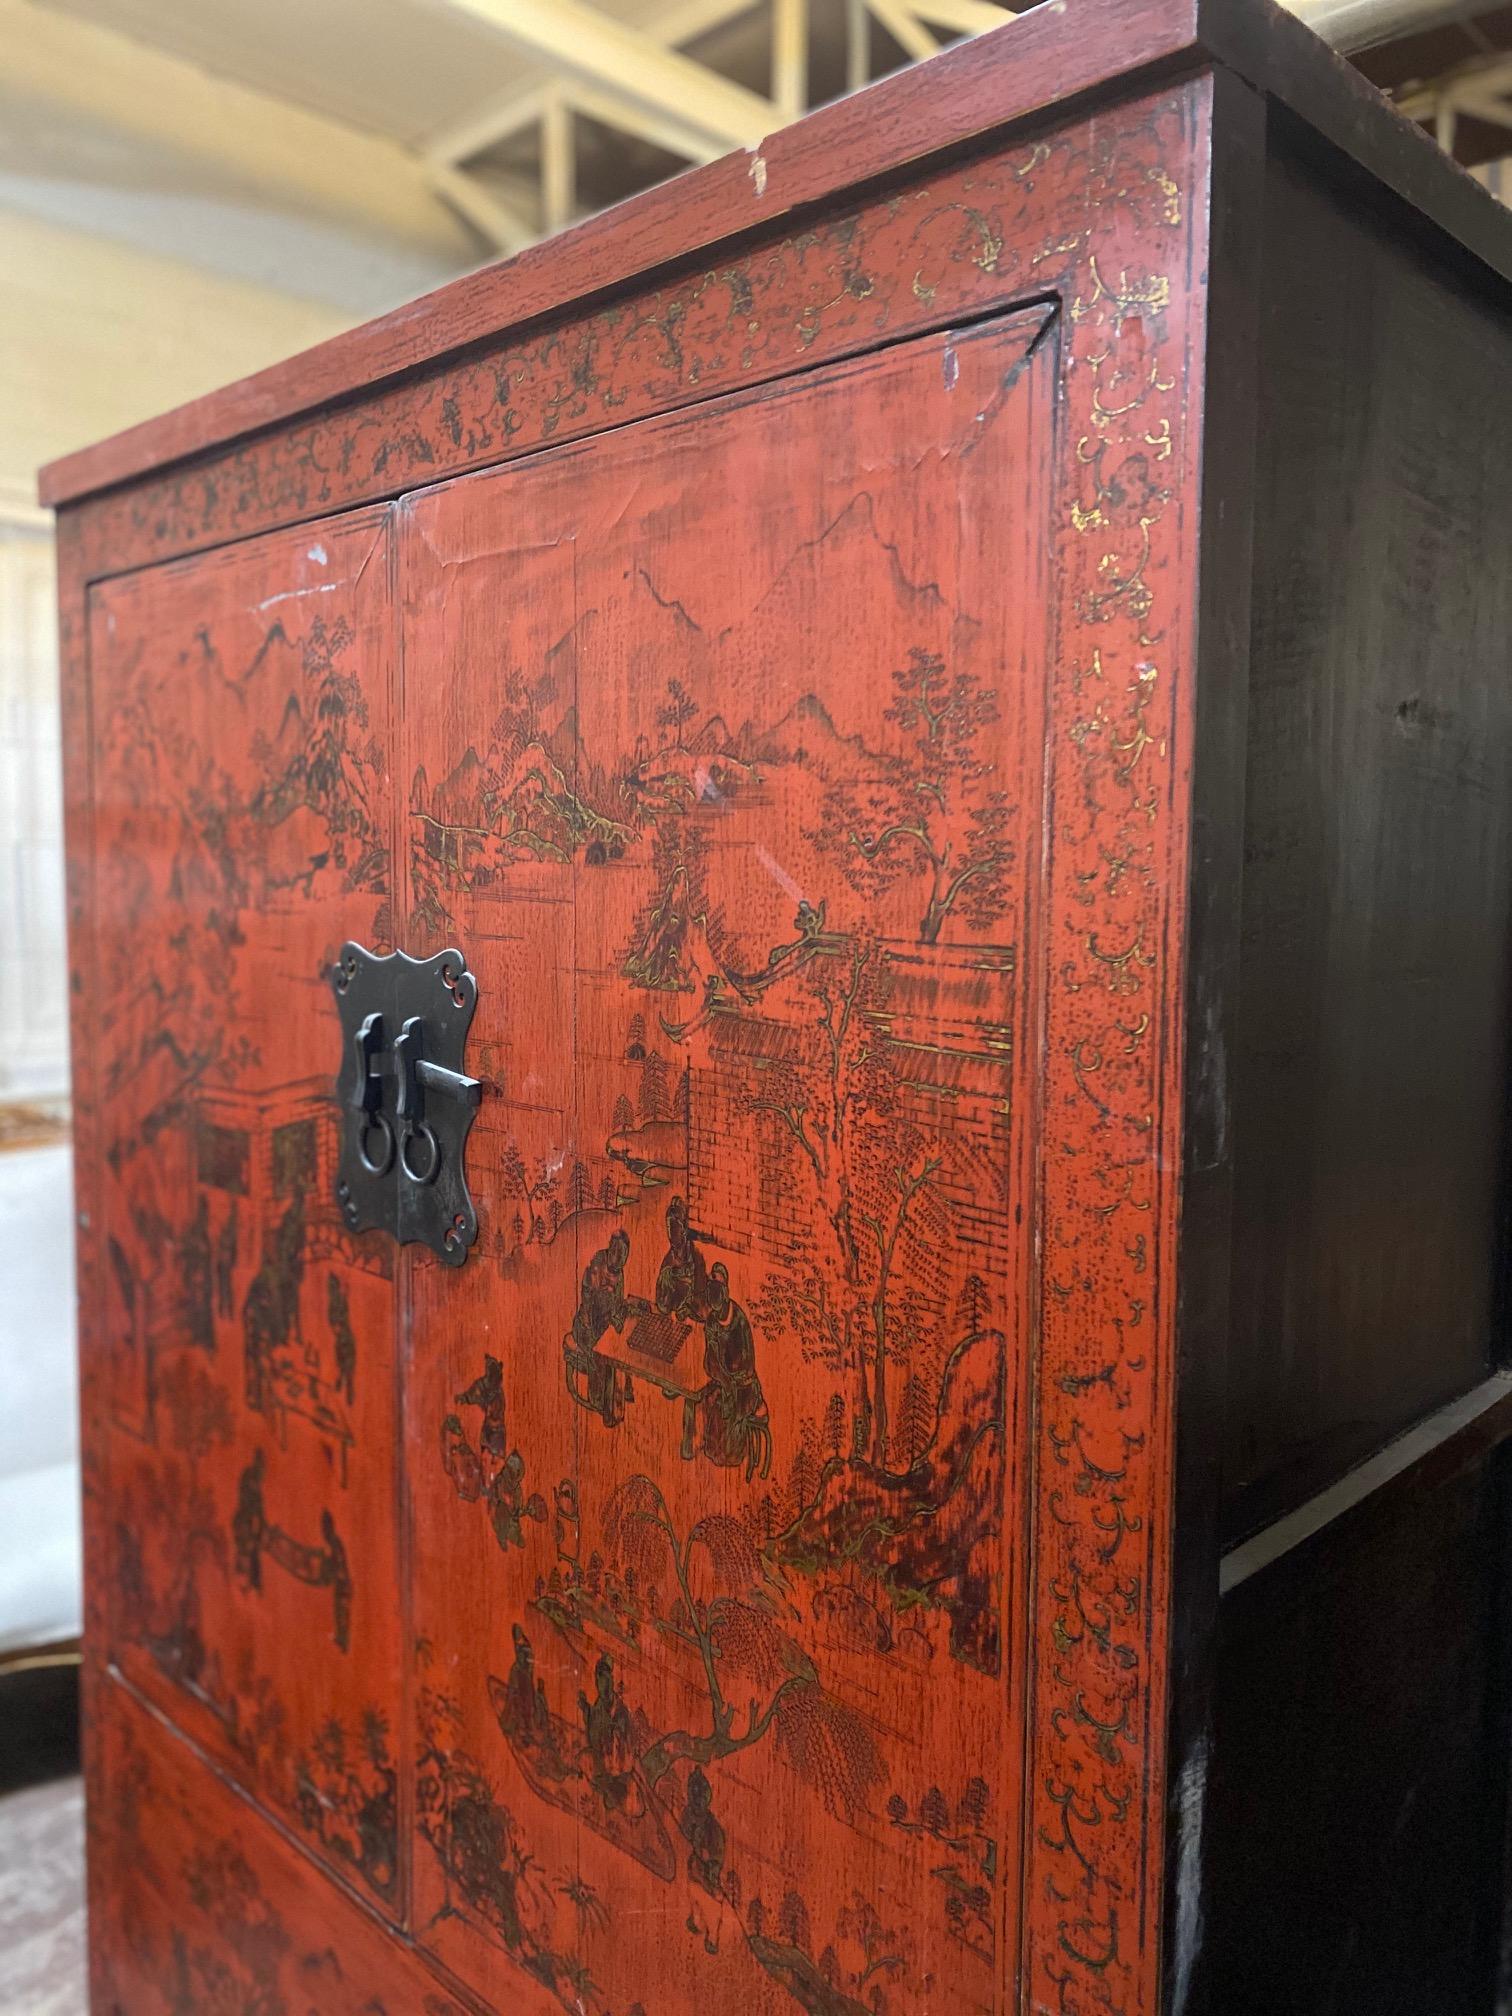 This antique Chinese armoire features a red and gold leafed exterior with wide, sturdy shelves on the interior. 

Originates from China, circa 1900. 

Measurements: 50.5'' W x 80'' H x 21'' D.